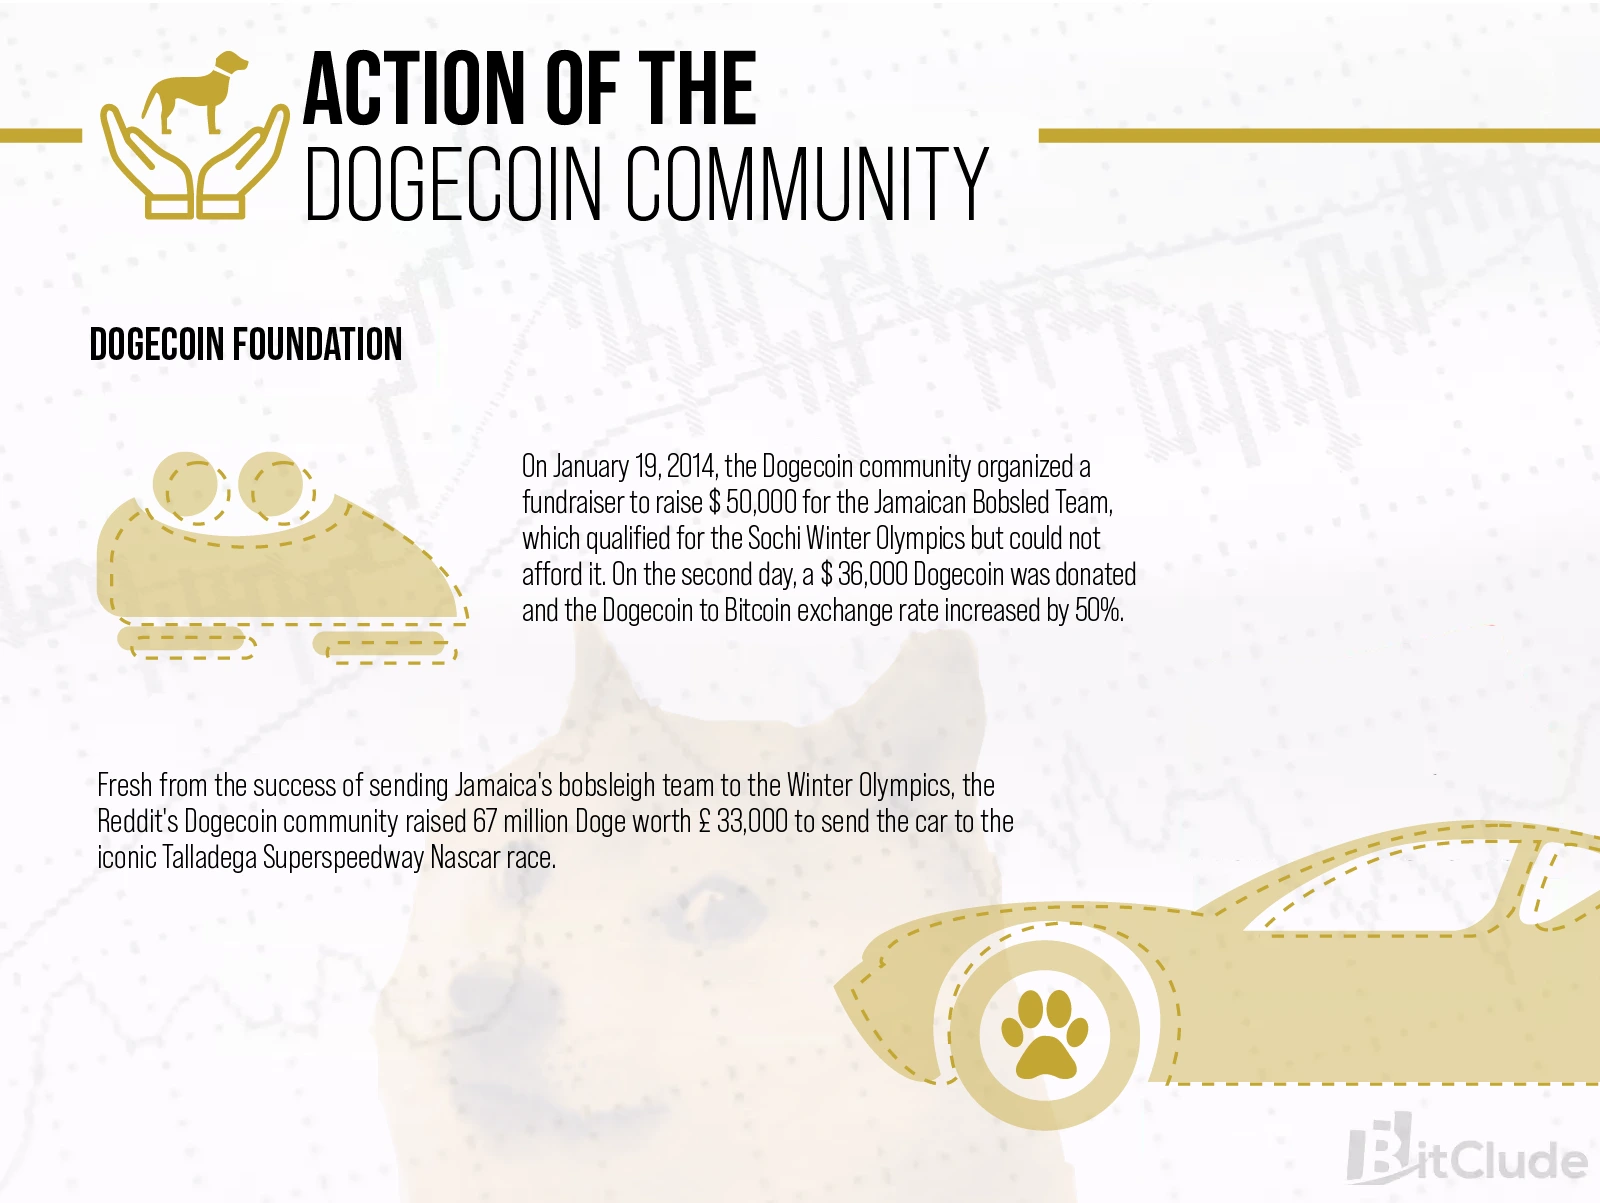 The Dogecoin community is very extensive, many collections and charity actions have been made using this cryptocurrency.